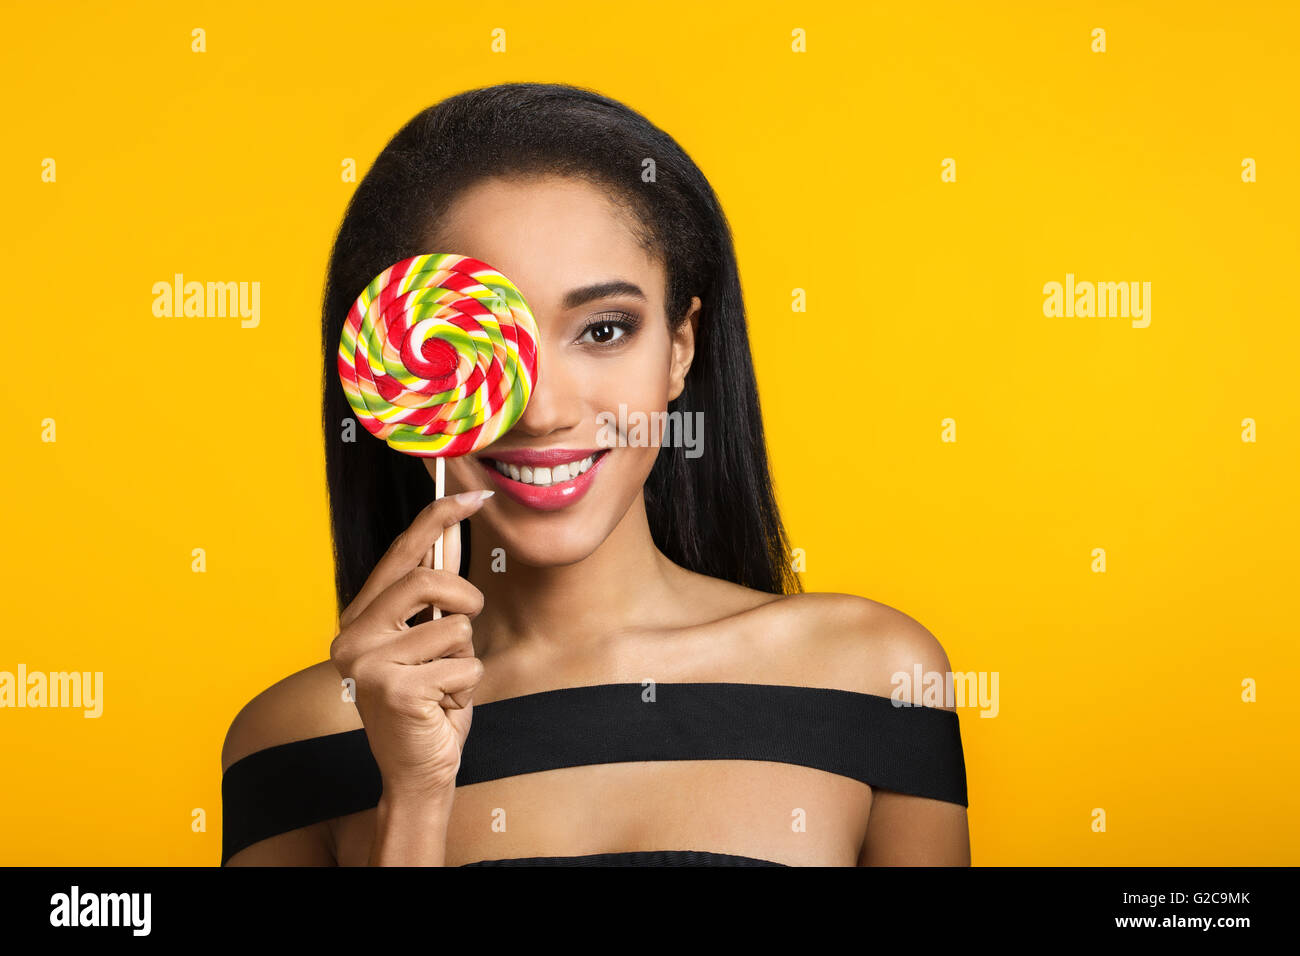 Smiling cute mulatto girl holding and covering her eye with big colourful sweet lollipop looking at camera over sunny, yellow background. Stock Photo